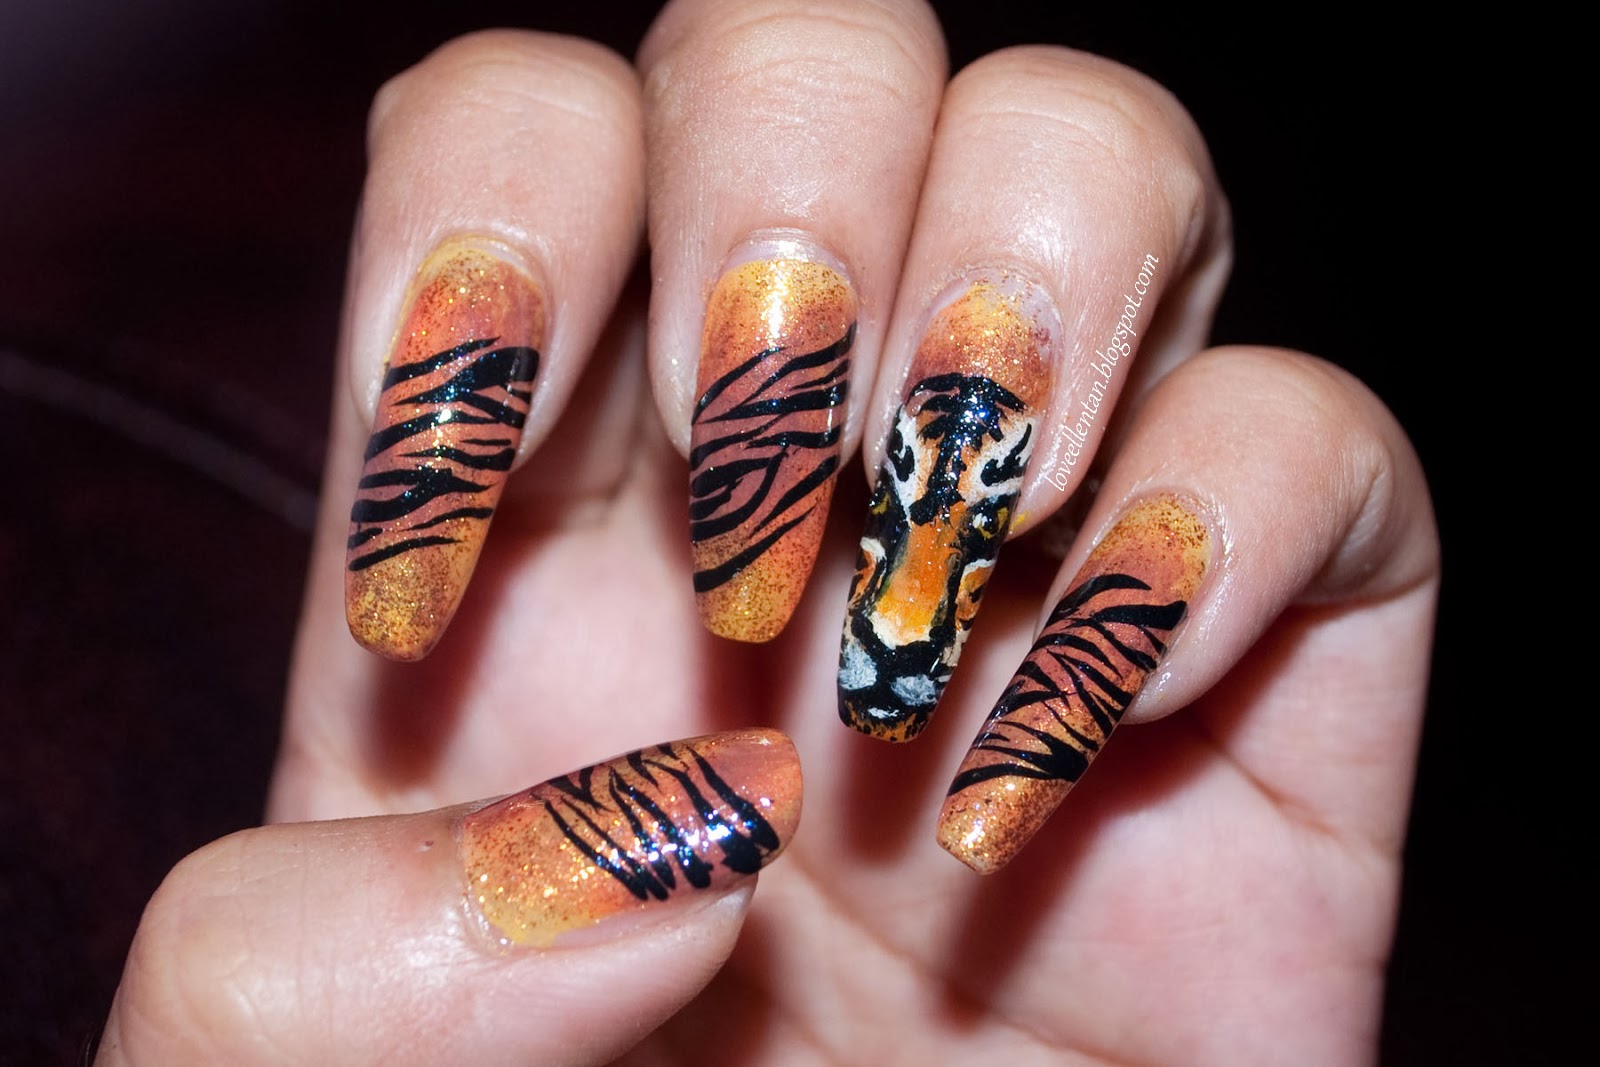 2. 20+ Best Tiger Nail Art Designs and Ideas for 2021 - wide 4